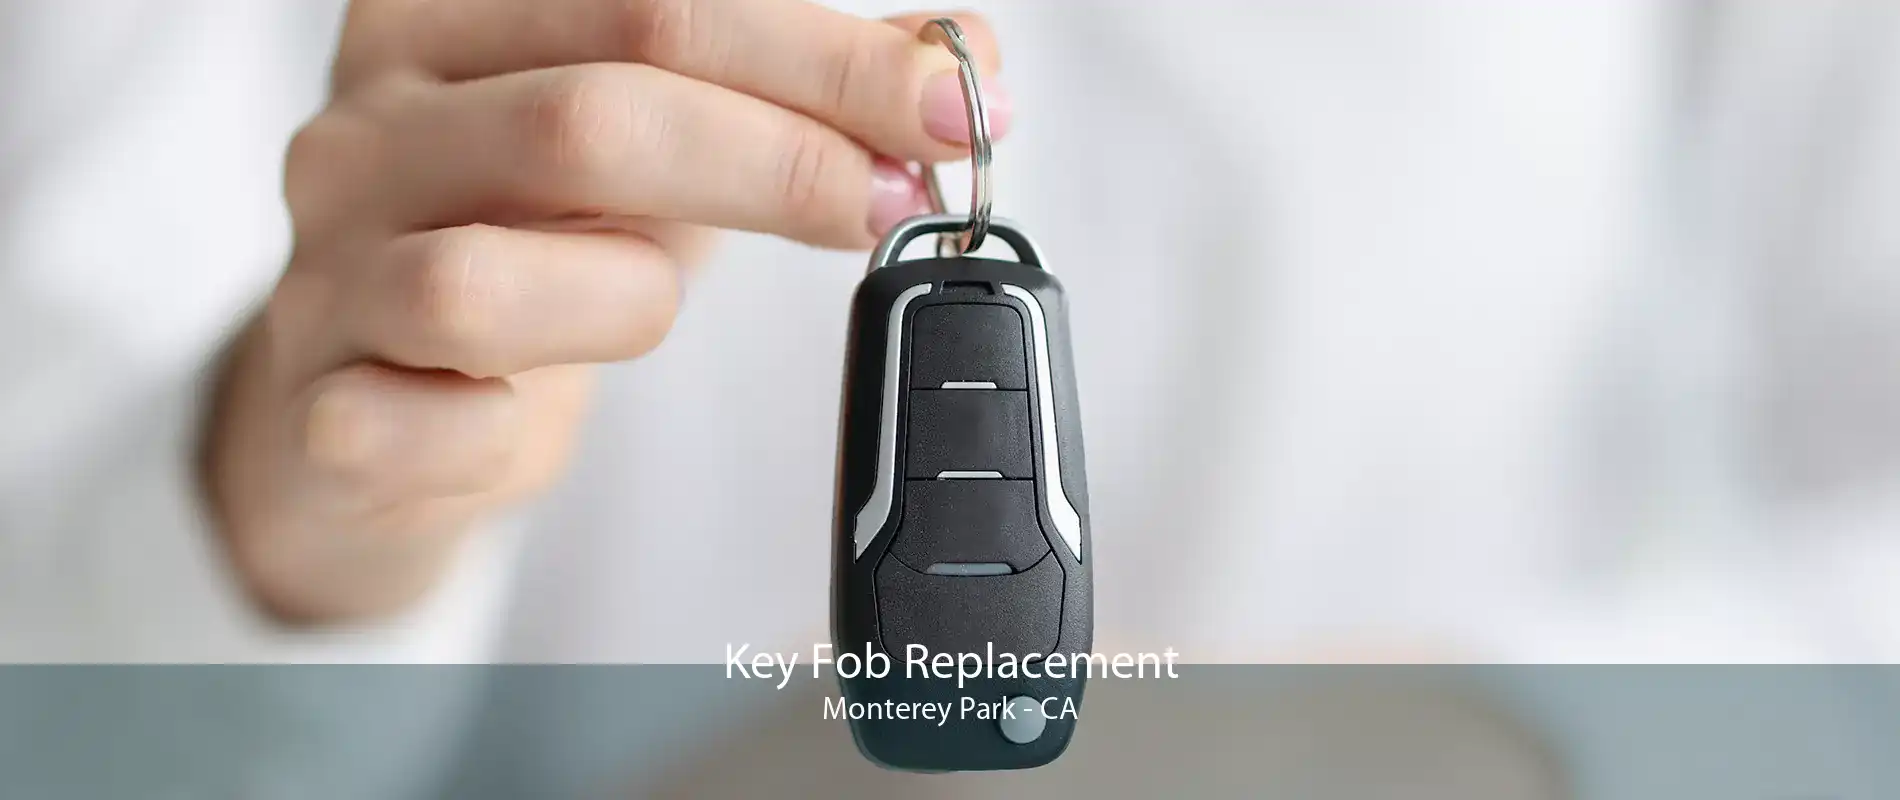 Key Fob Replacement Monterey Park - CA